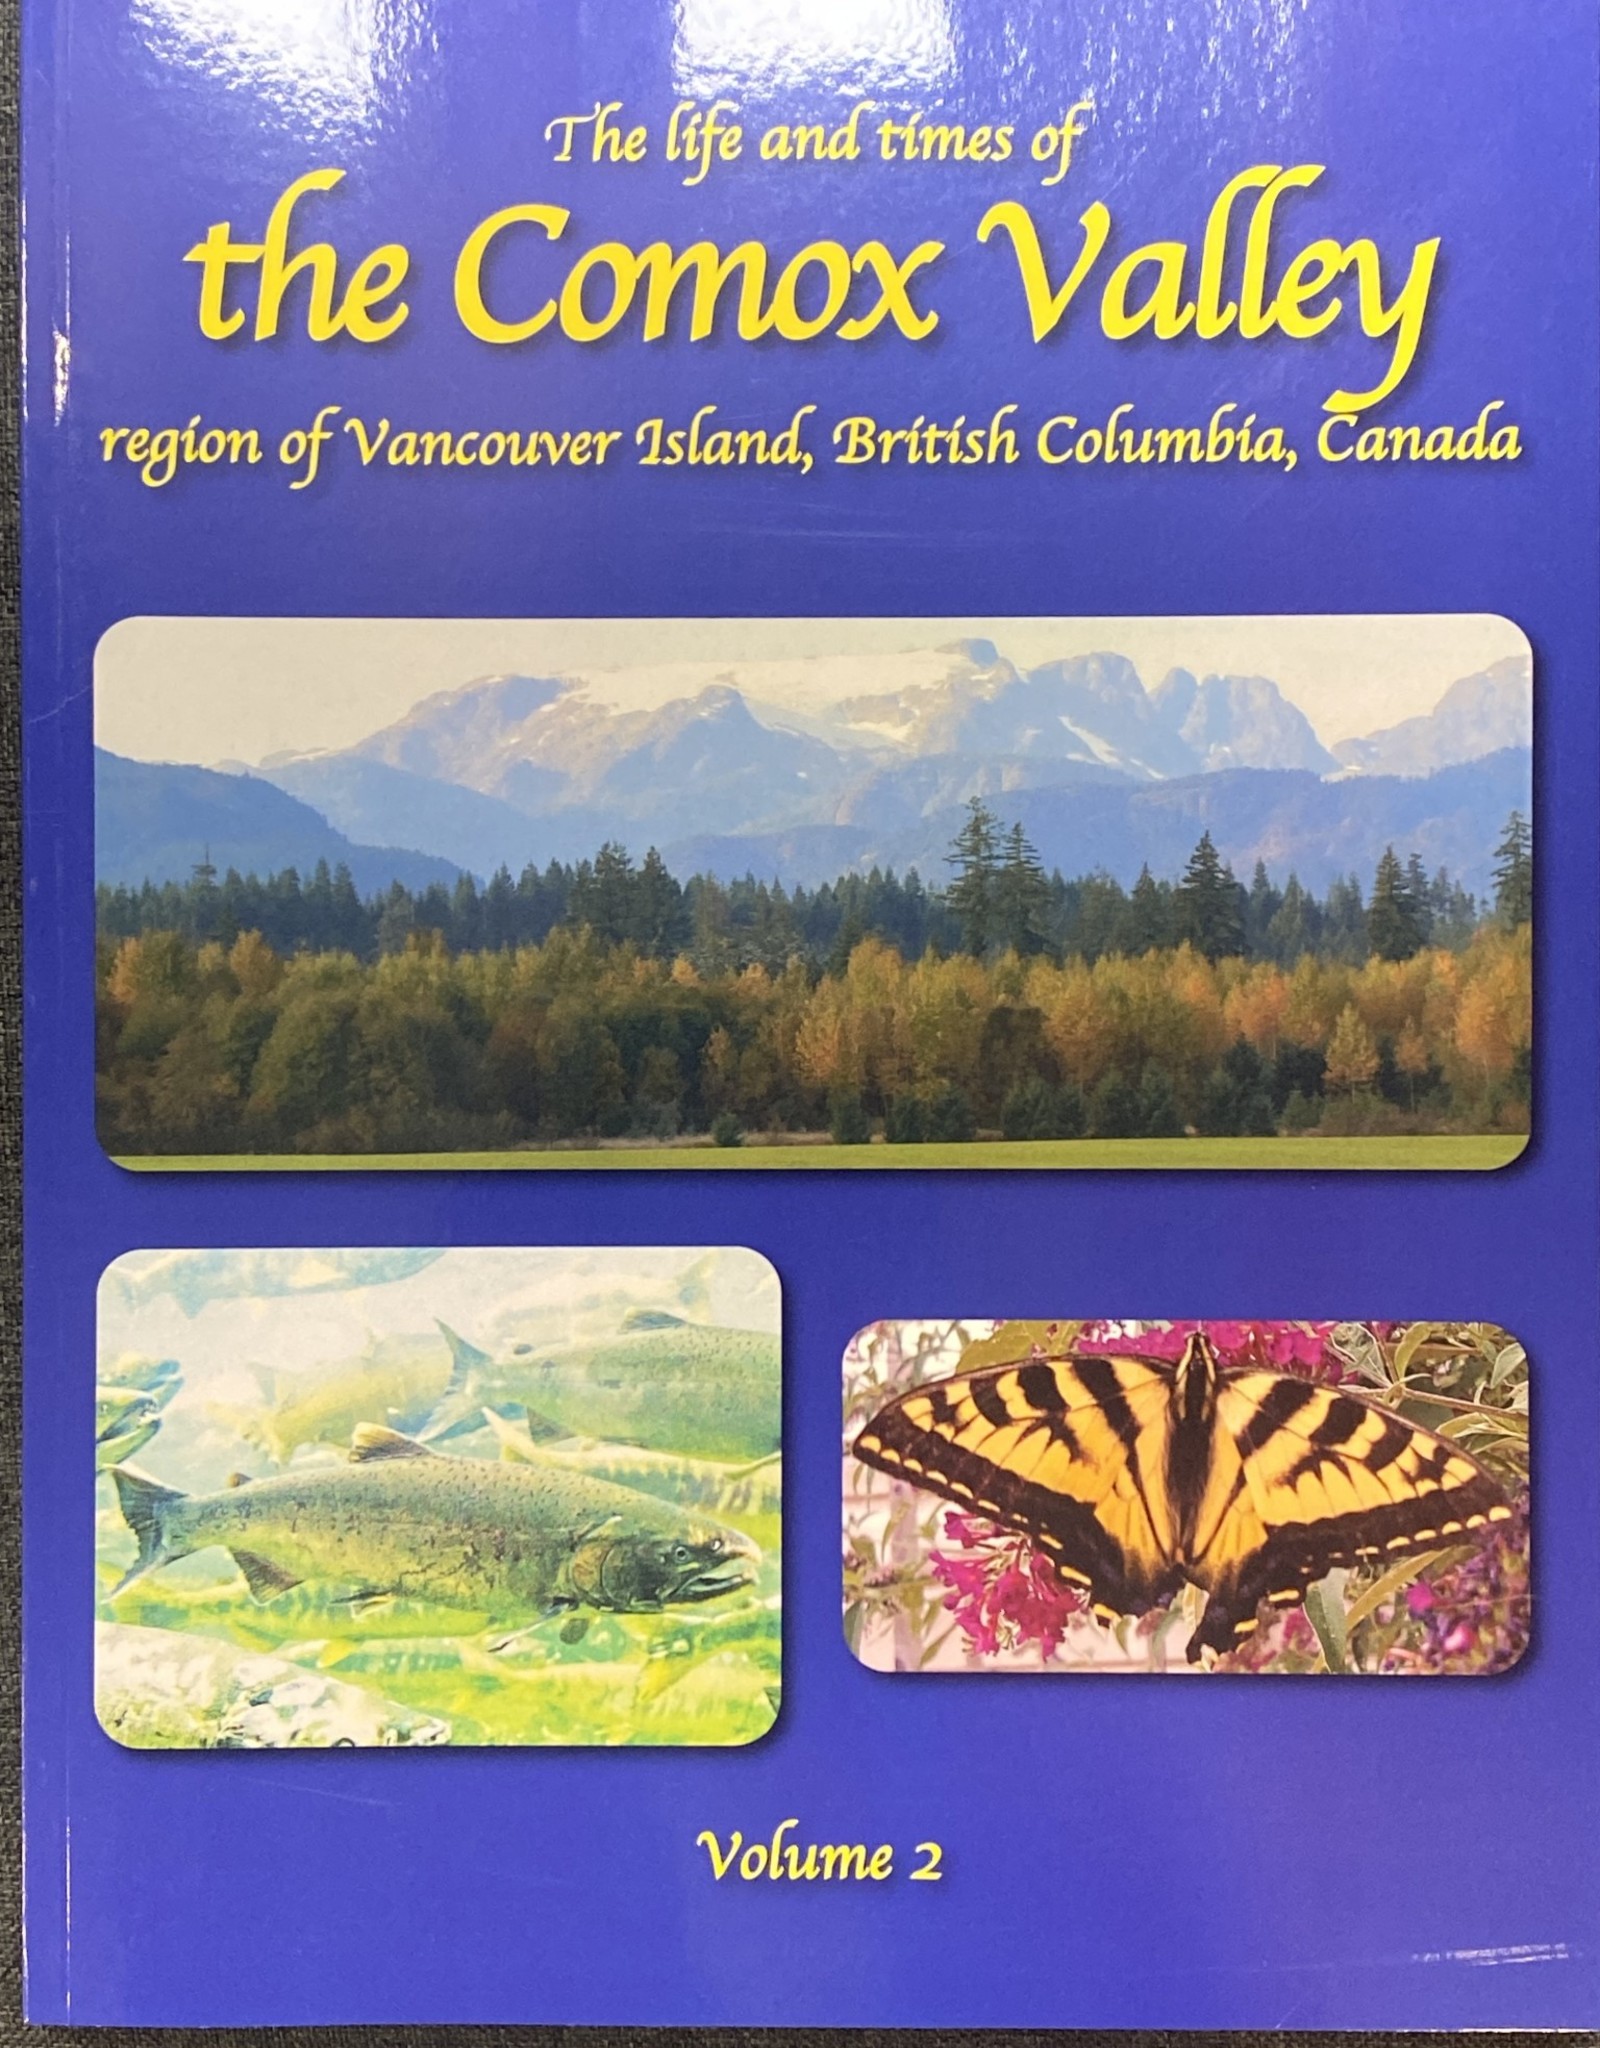 The life and times of the Comox Valley